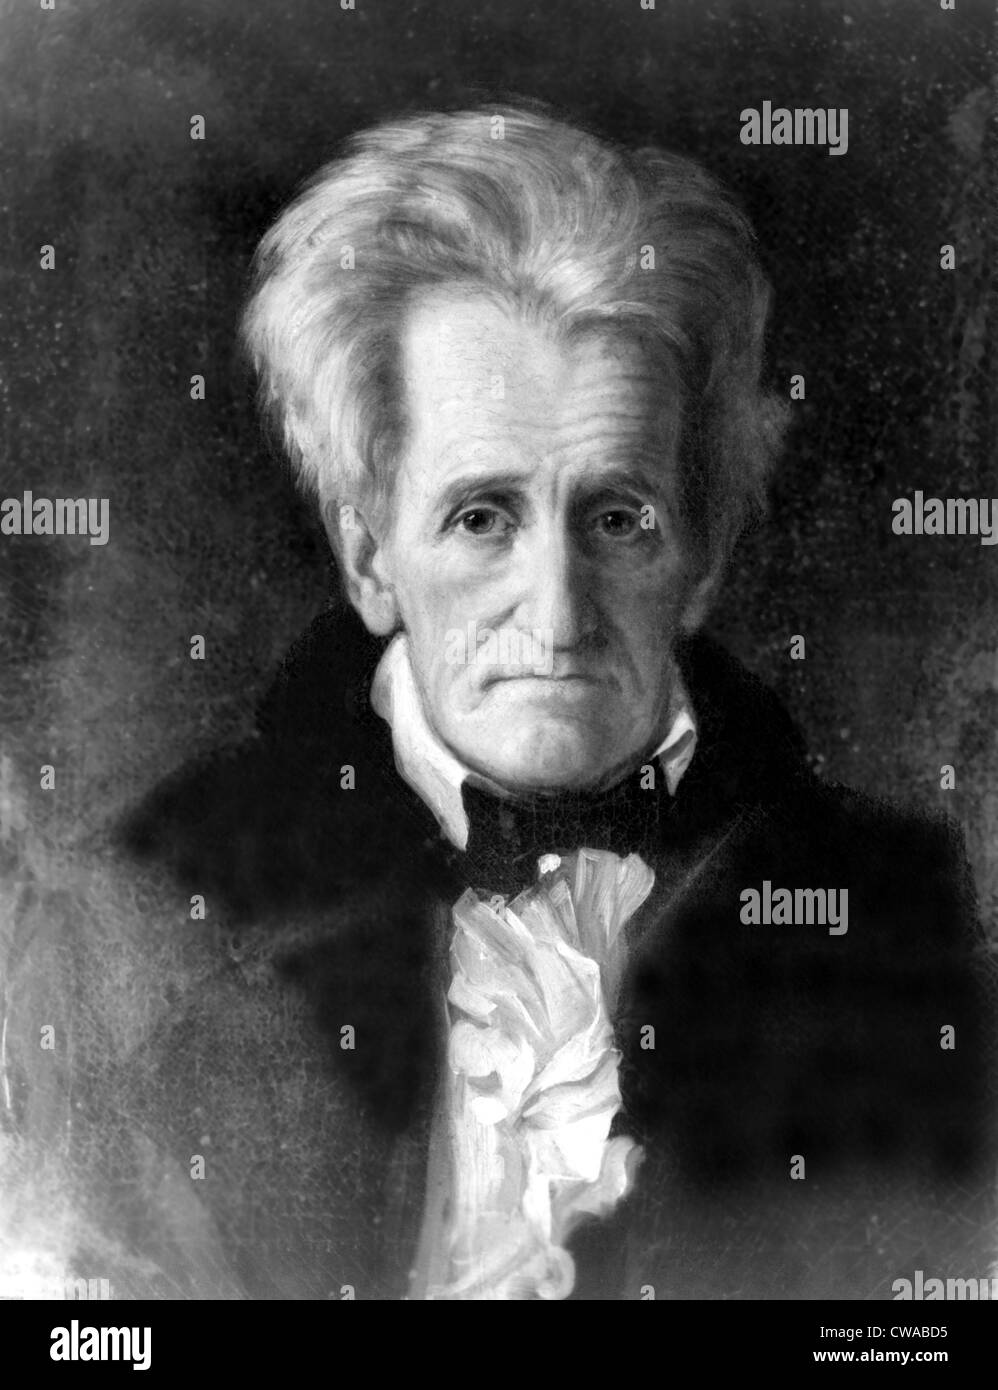 Andrew Jackson (1767-1845) 7th U.S. President, 1845 portrait by George Healy.. Courtesy: CSU Archives / Everett Collection Stock Photo